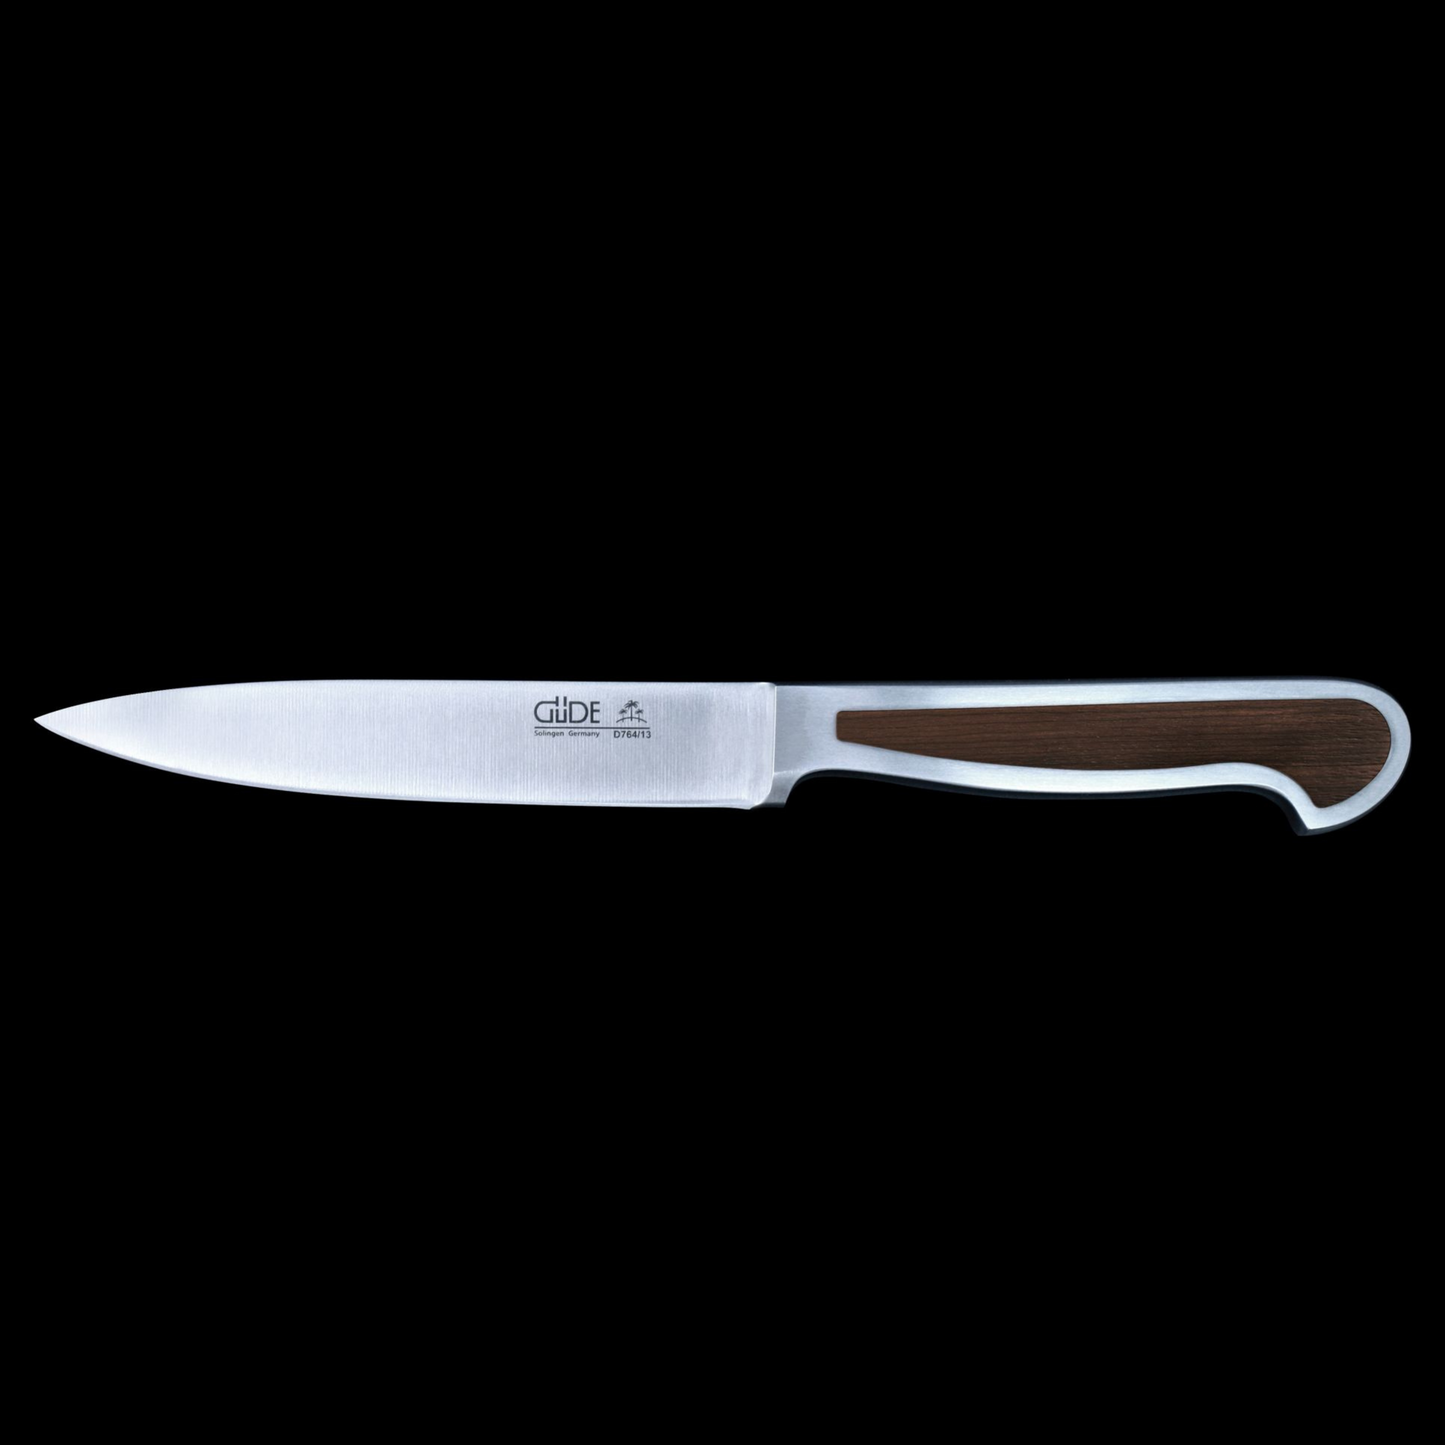 Gude Delta Series Forged Double Bolster Paring Knife 5", African Black Wood Handle - GuedeUSA